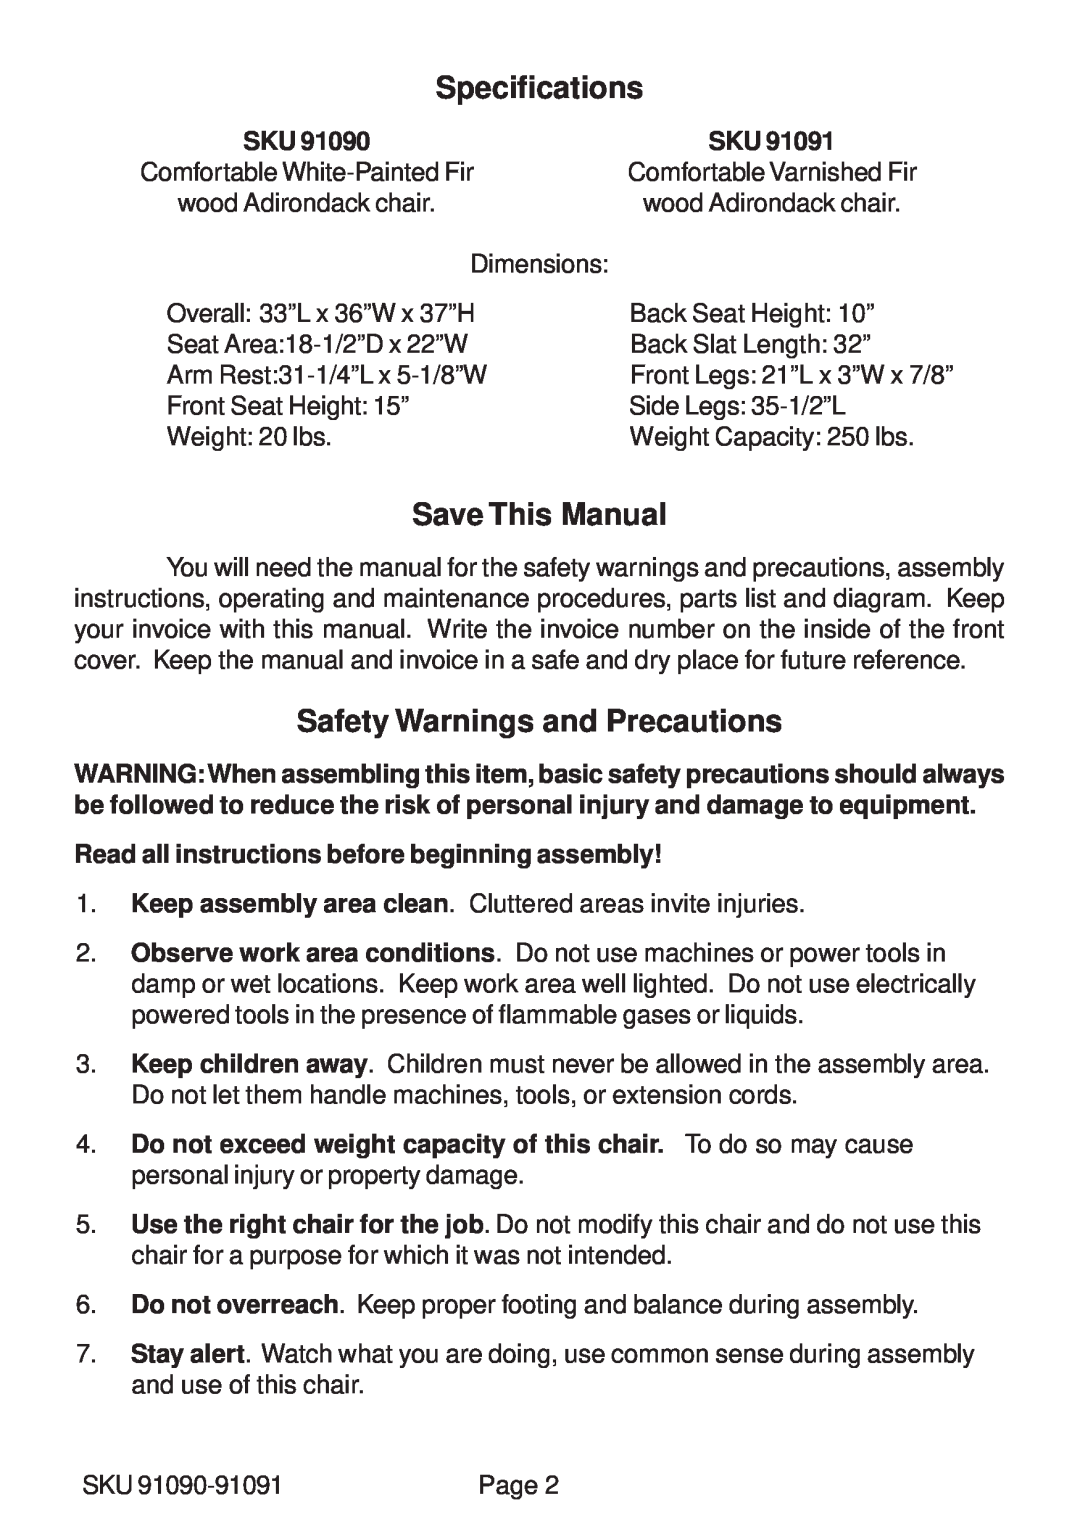 Harbor Freight Tools 91091, 91090 operating instructions Specifications, Save This Manual, Safety Warnings and Precautions 